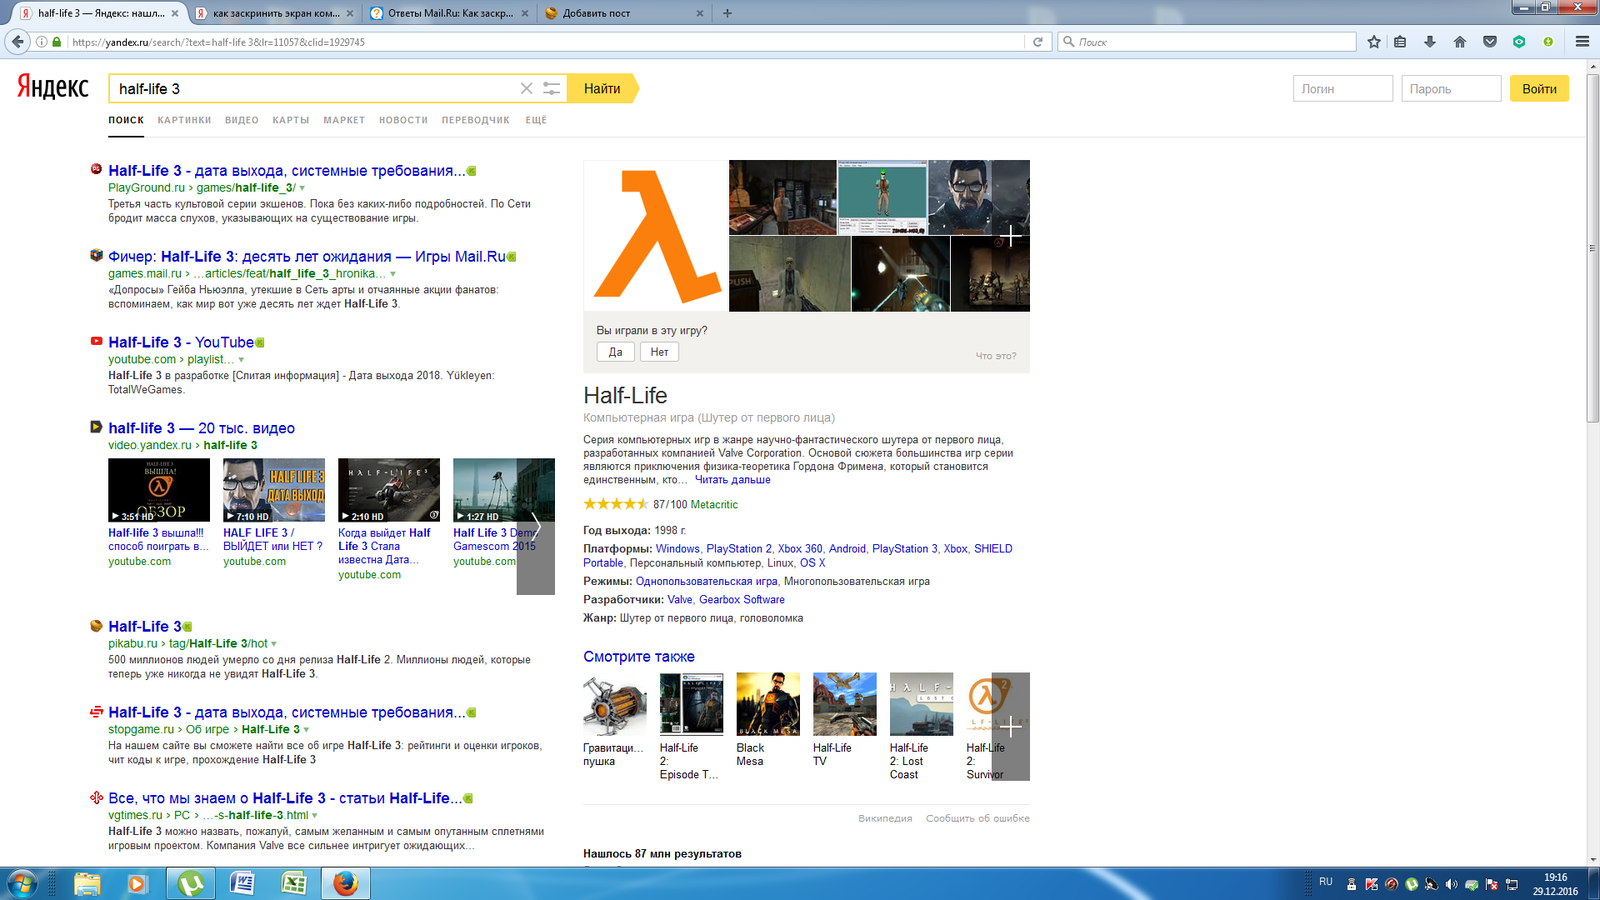 Yandex site from the future? - Yandex., My, Games, Search, Half-life 3